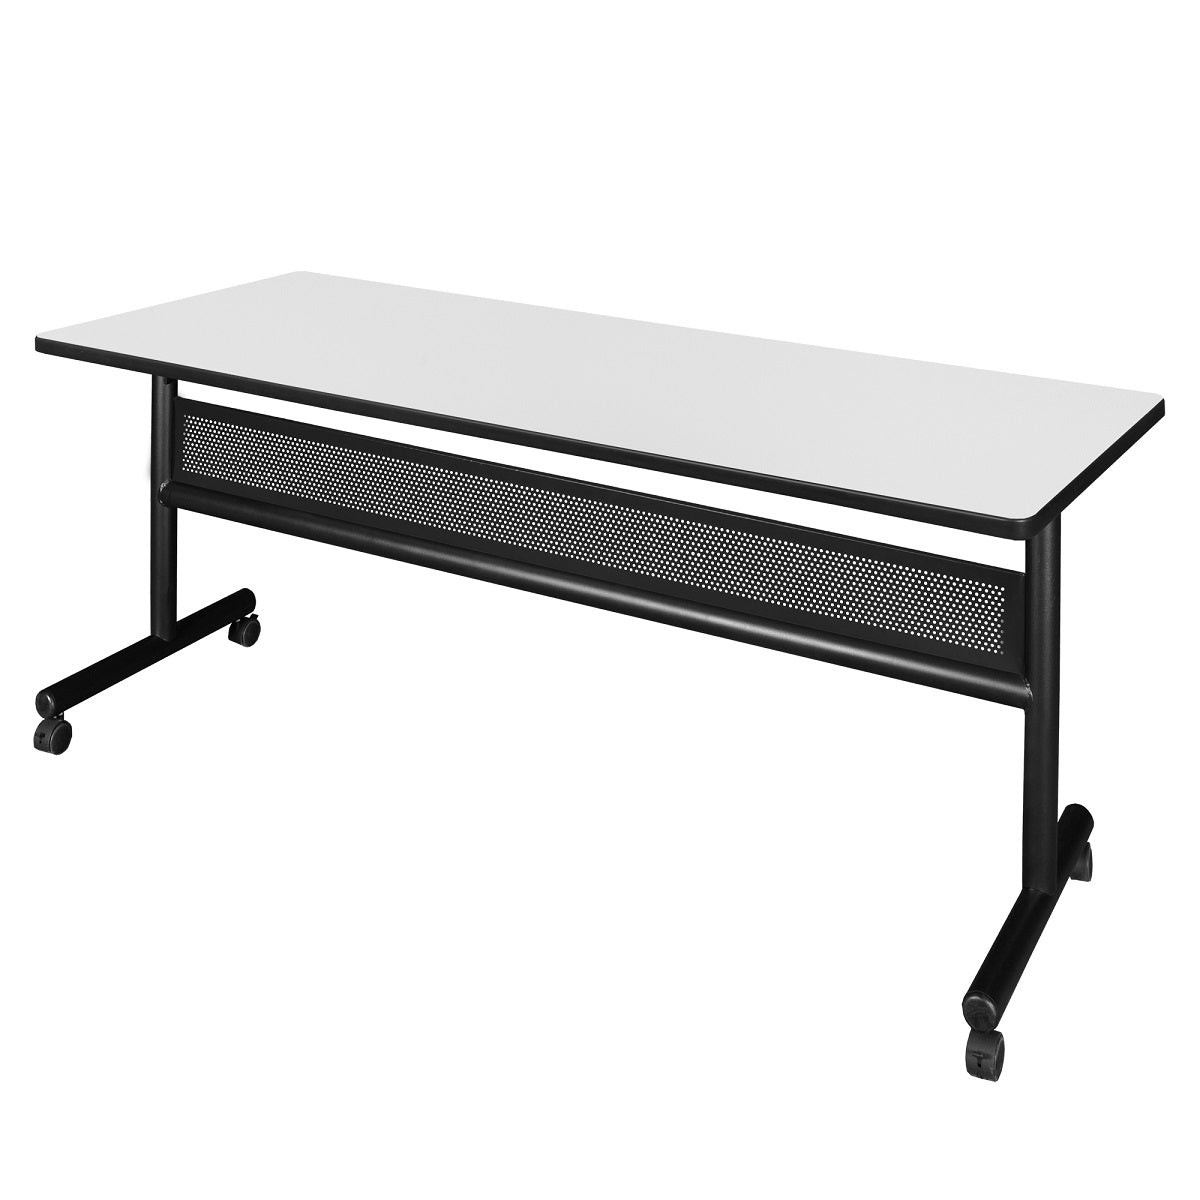 Kobe Flip Top Mobile Training Table with Modesty Panel, 72" x 24" Rectangle